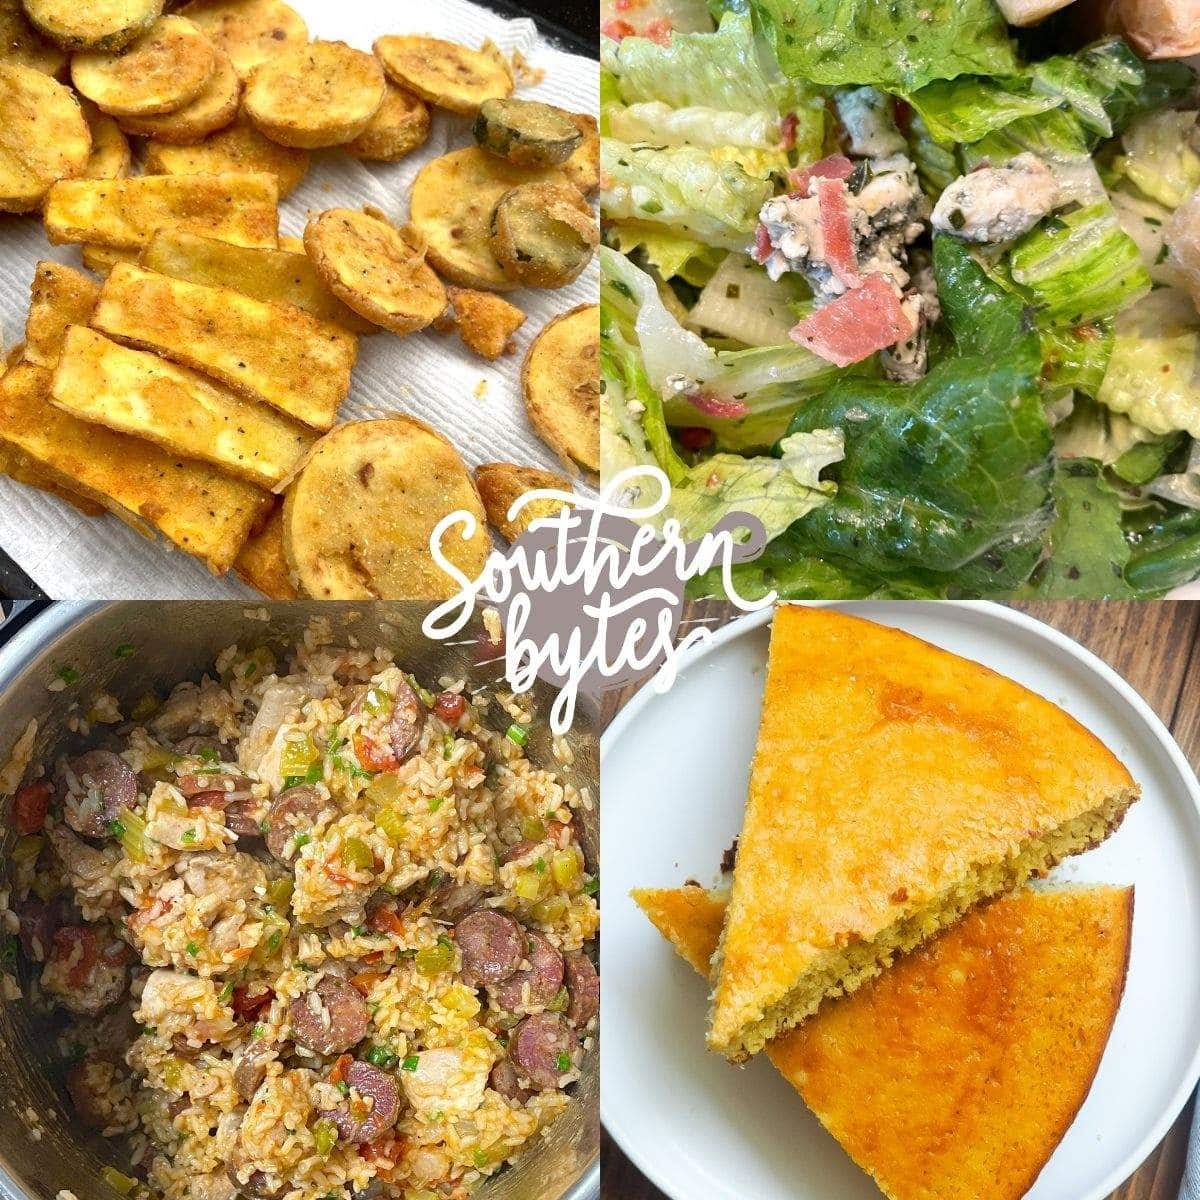 A collage of images showing sides to serve with jambalaya; cornbread, a side salad, and fried squash.